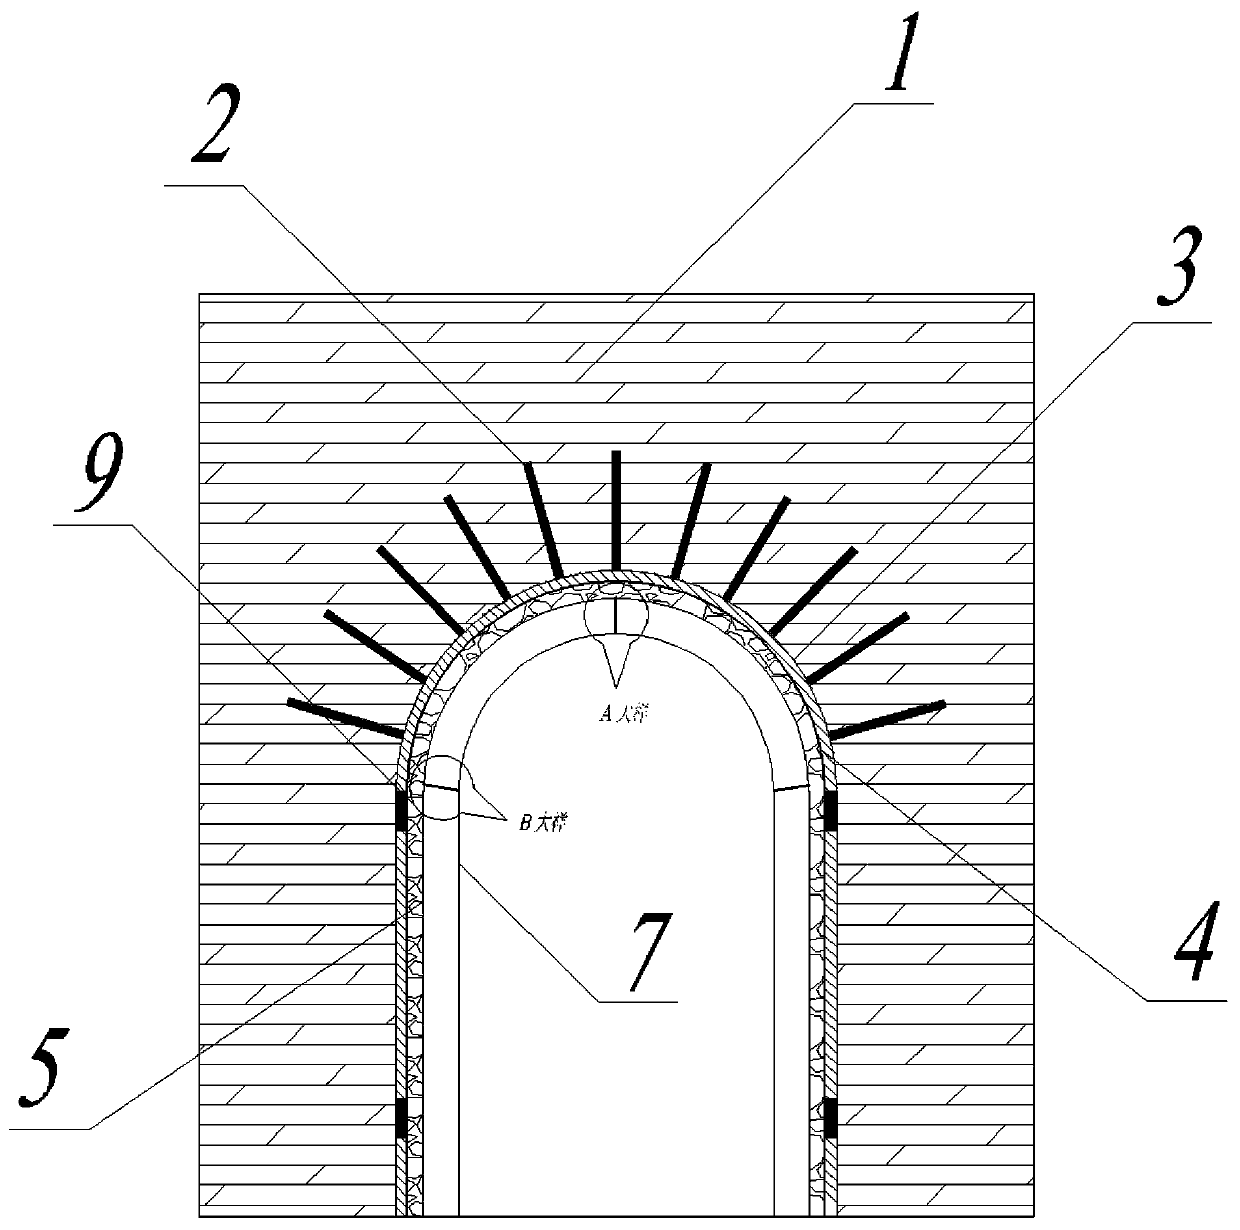 Tunnel lining structure filled with ceramic particles and construction method